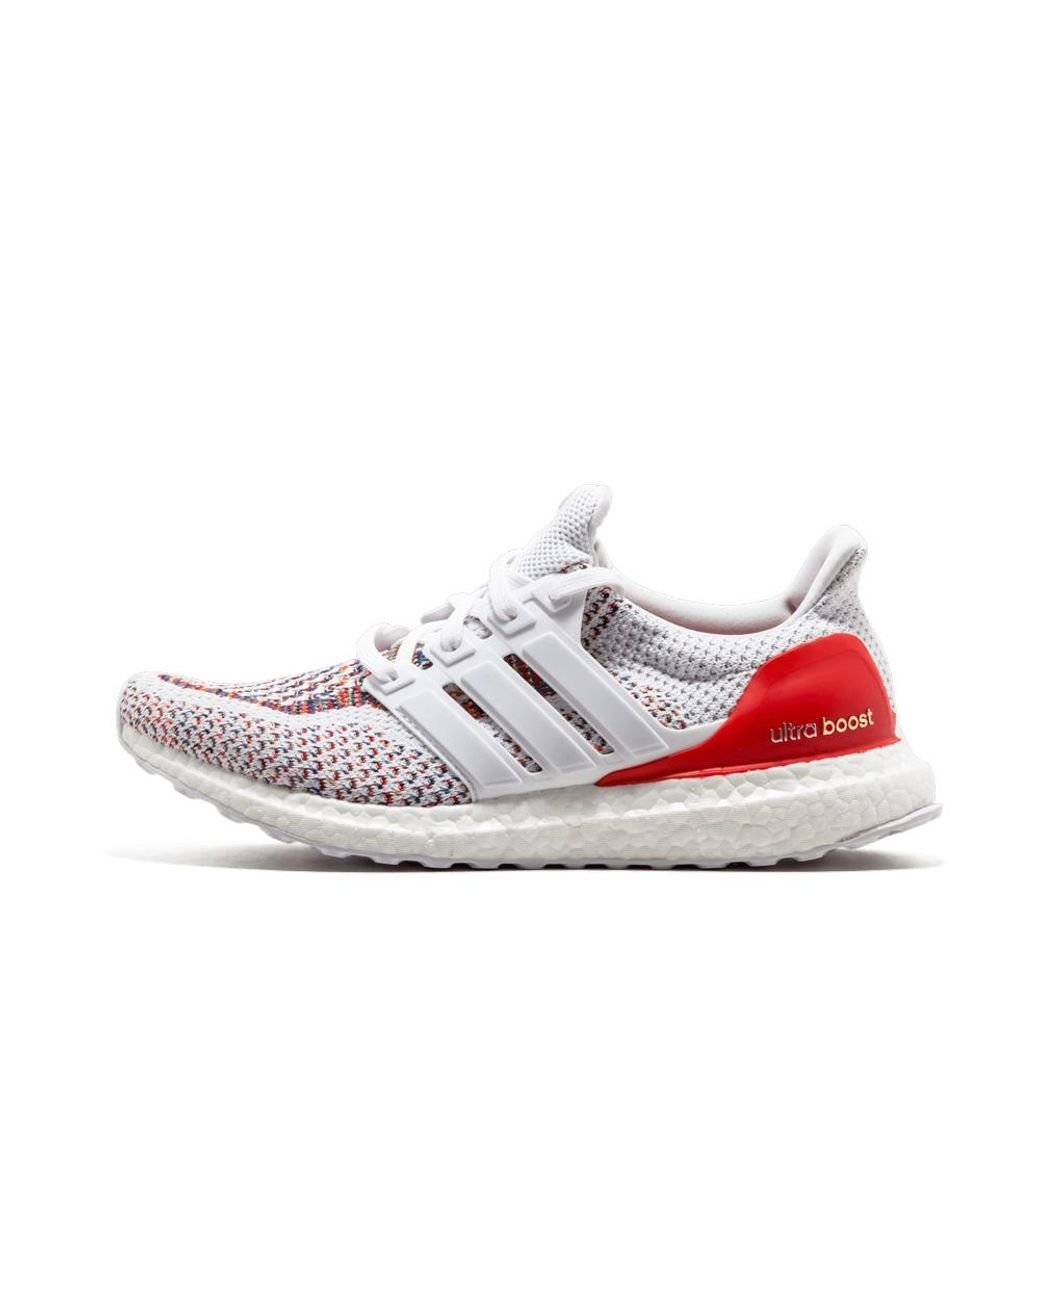 ultra boost size 9 mens